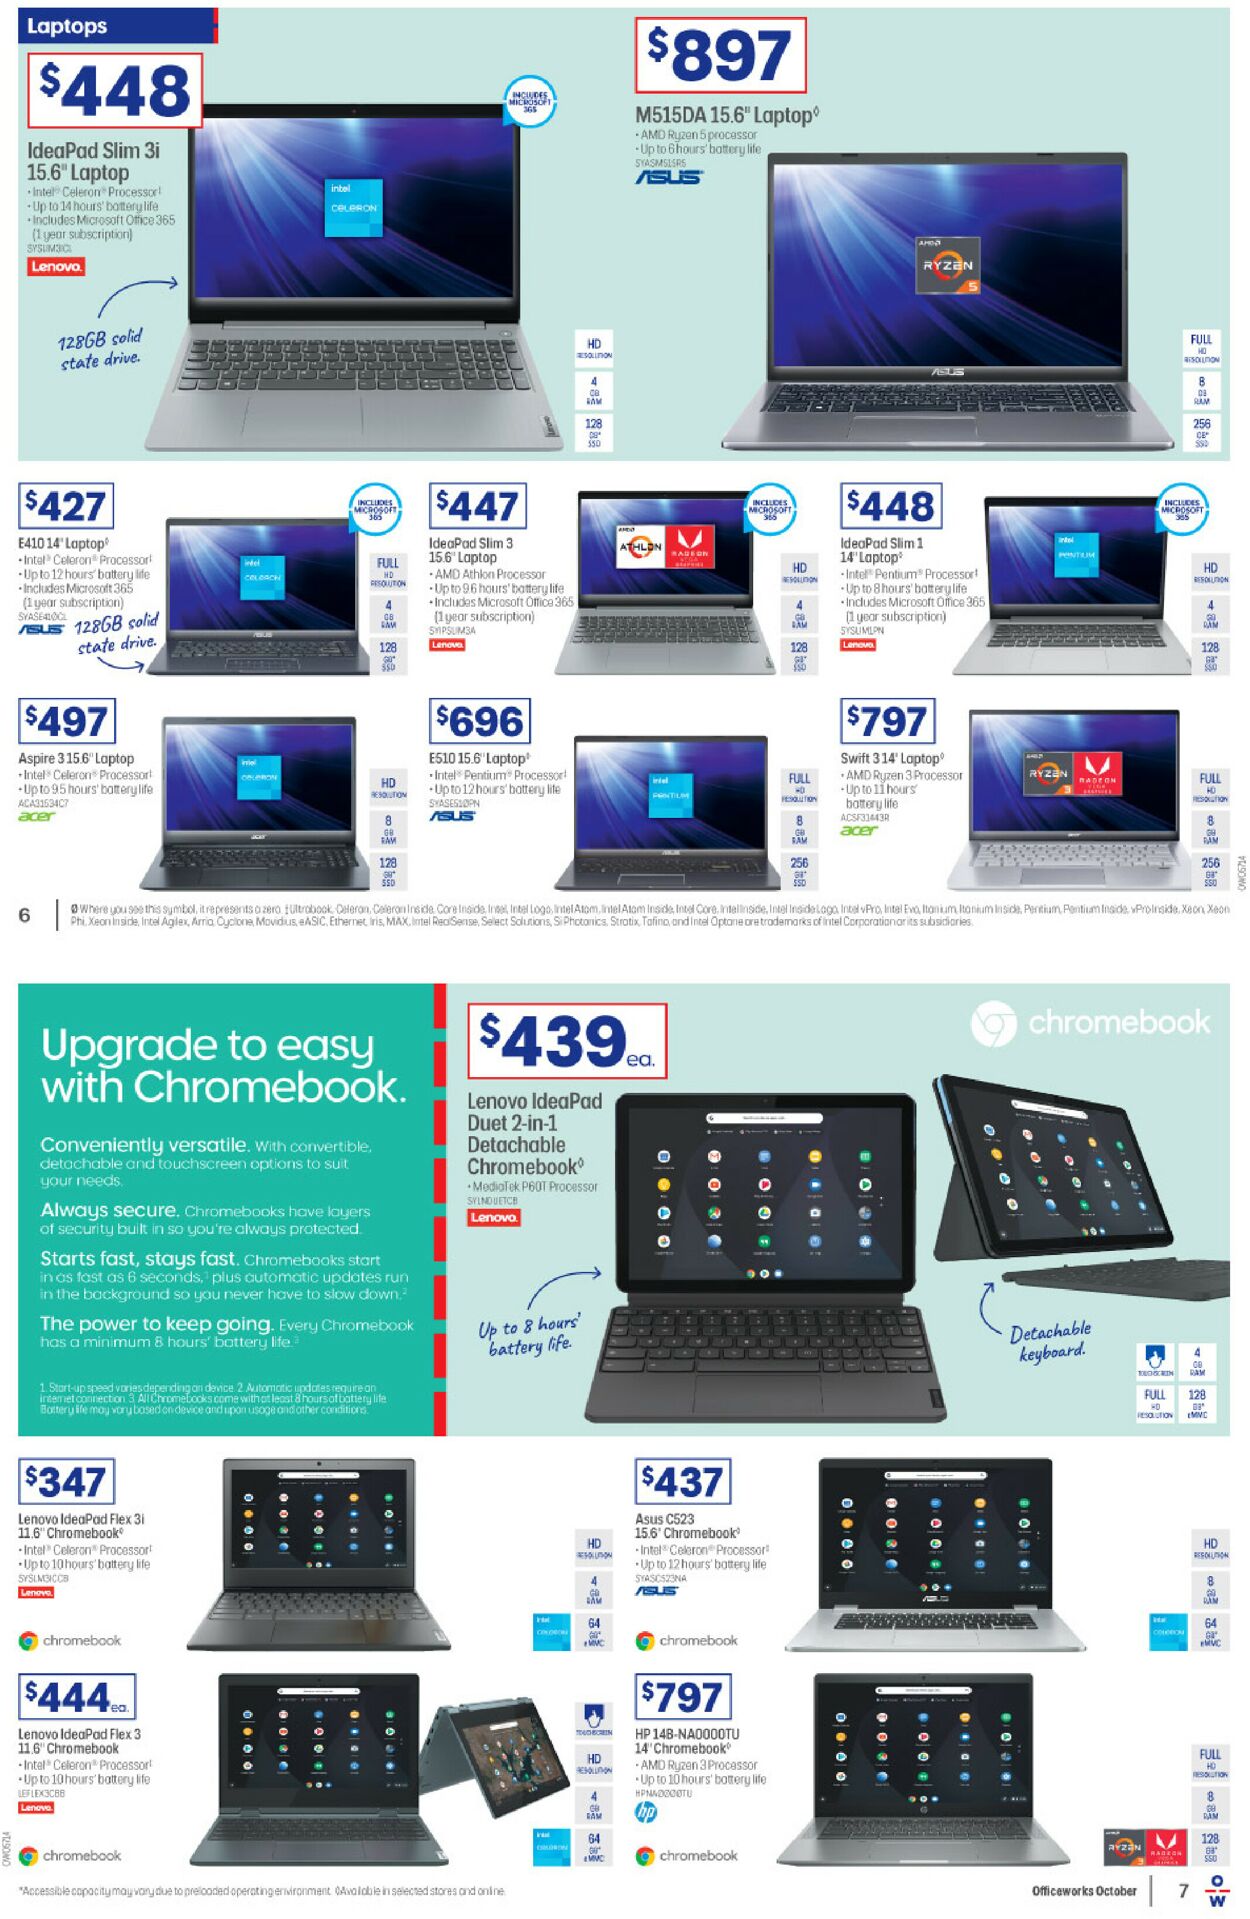 Catalogue Officeworks 14.10.2021 - 27.10.2021